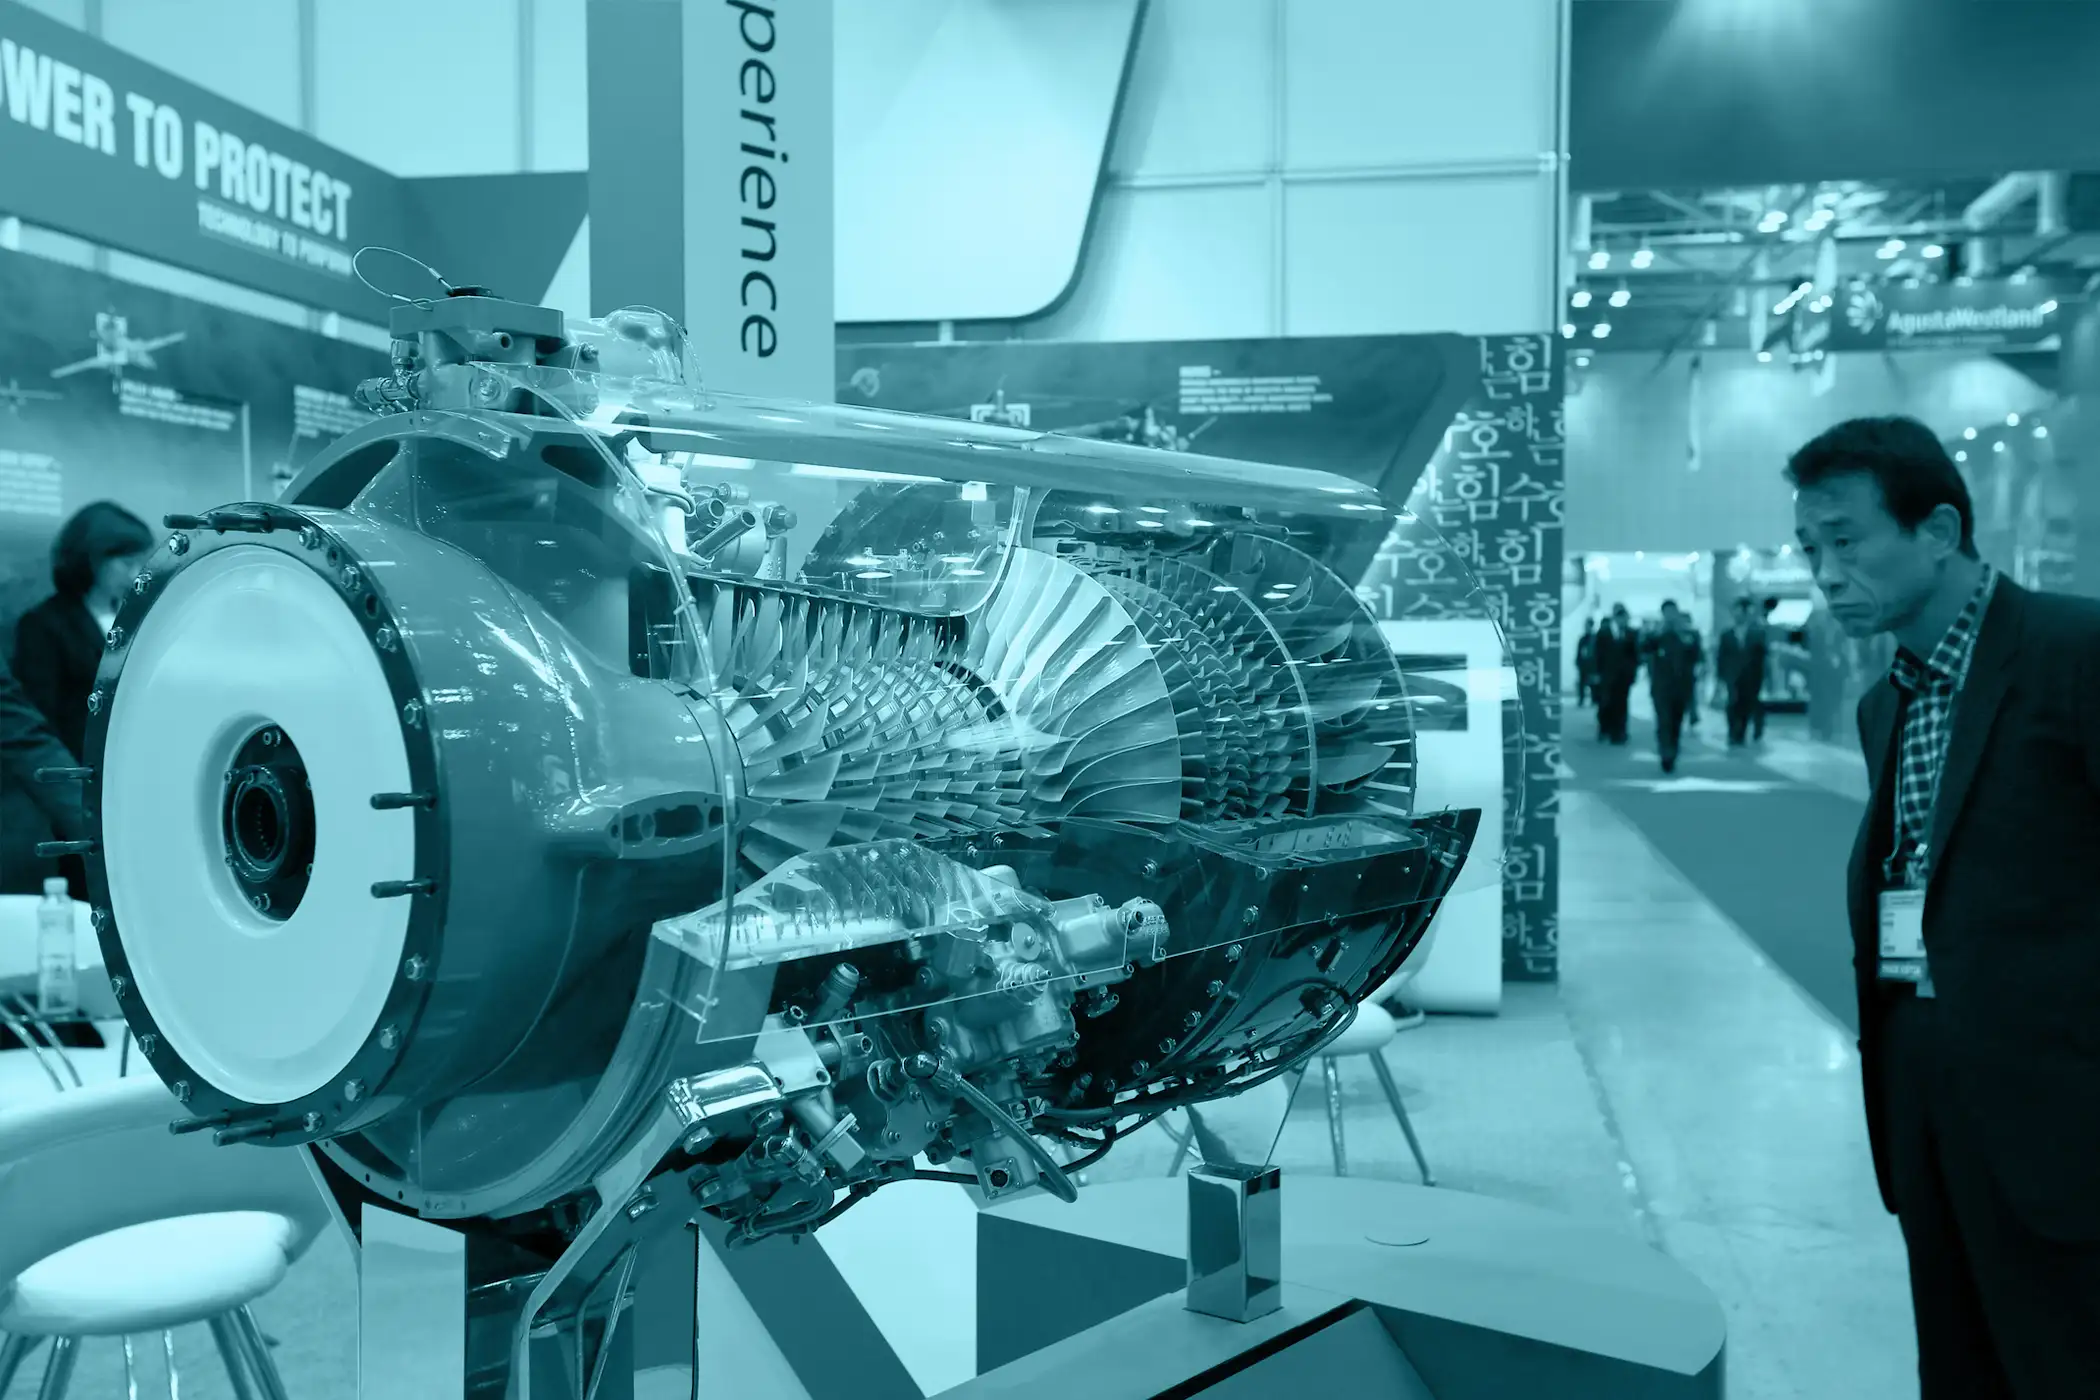 A visitor looks at a model of the Honeywell Aerospace T55 engine at the Seoul International Aerospace &amp; Defense Exhibition 2013 in Goyang, South Korea, on October 29, 2013.